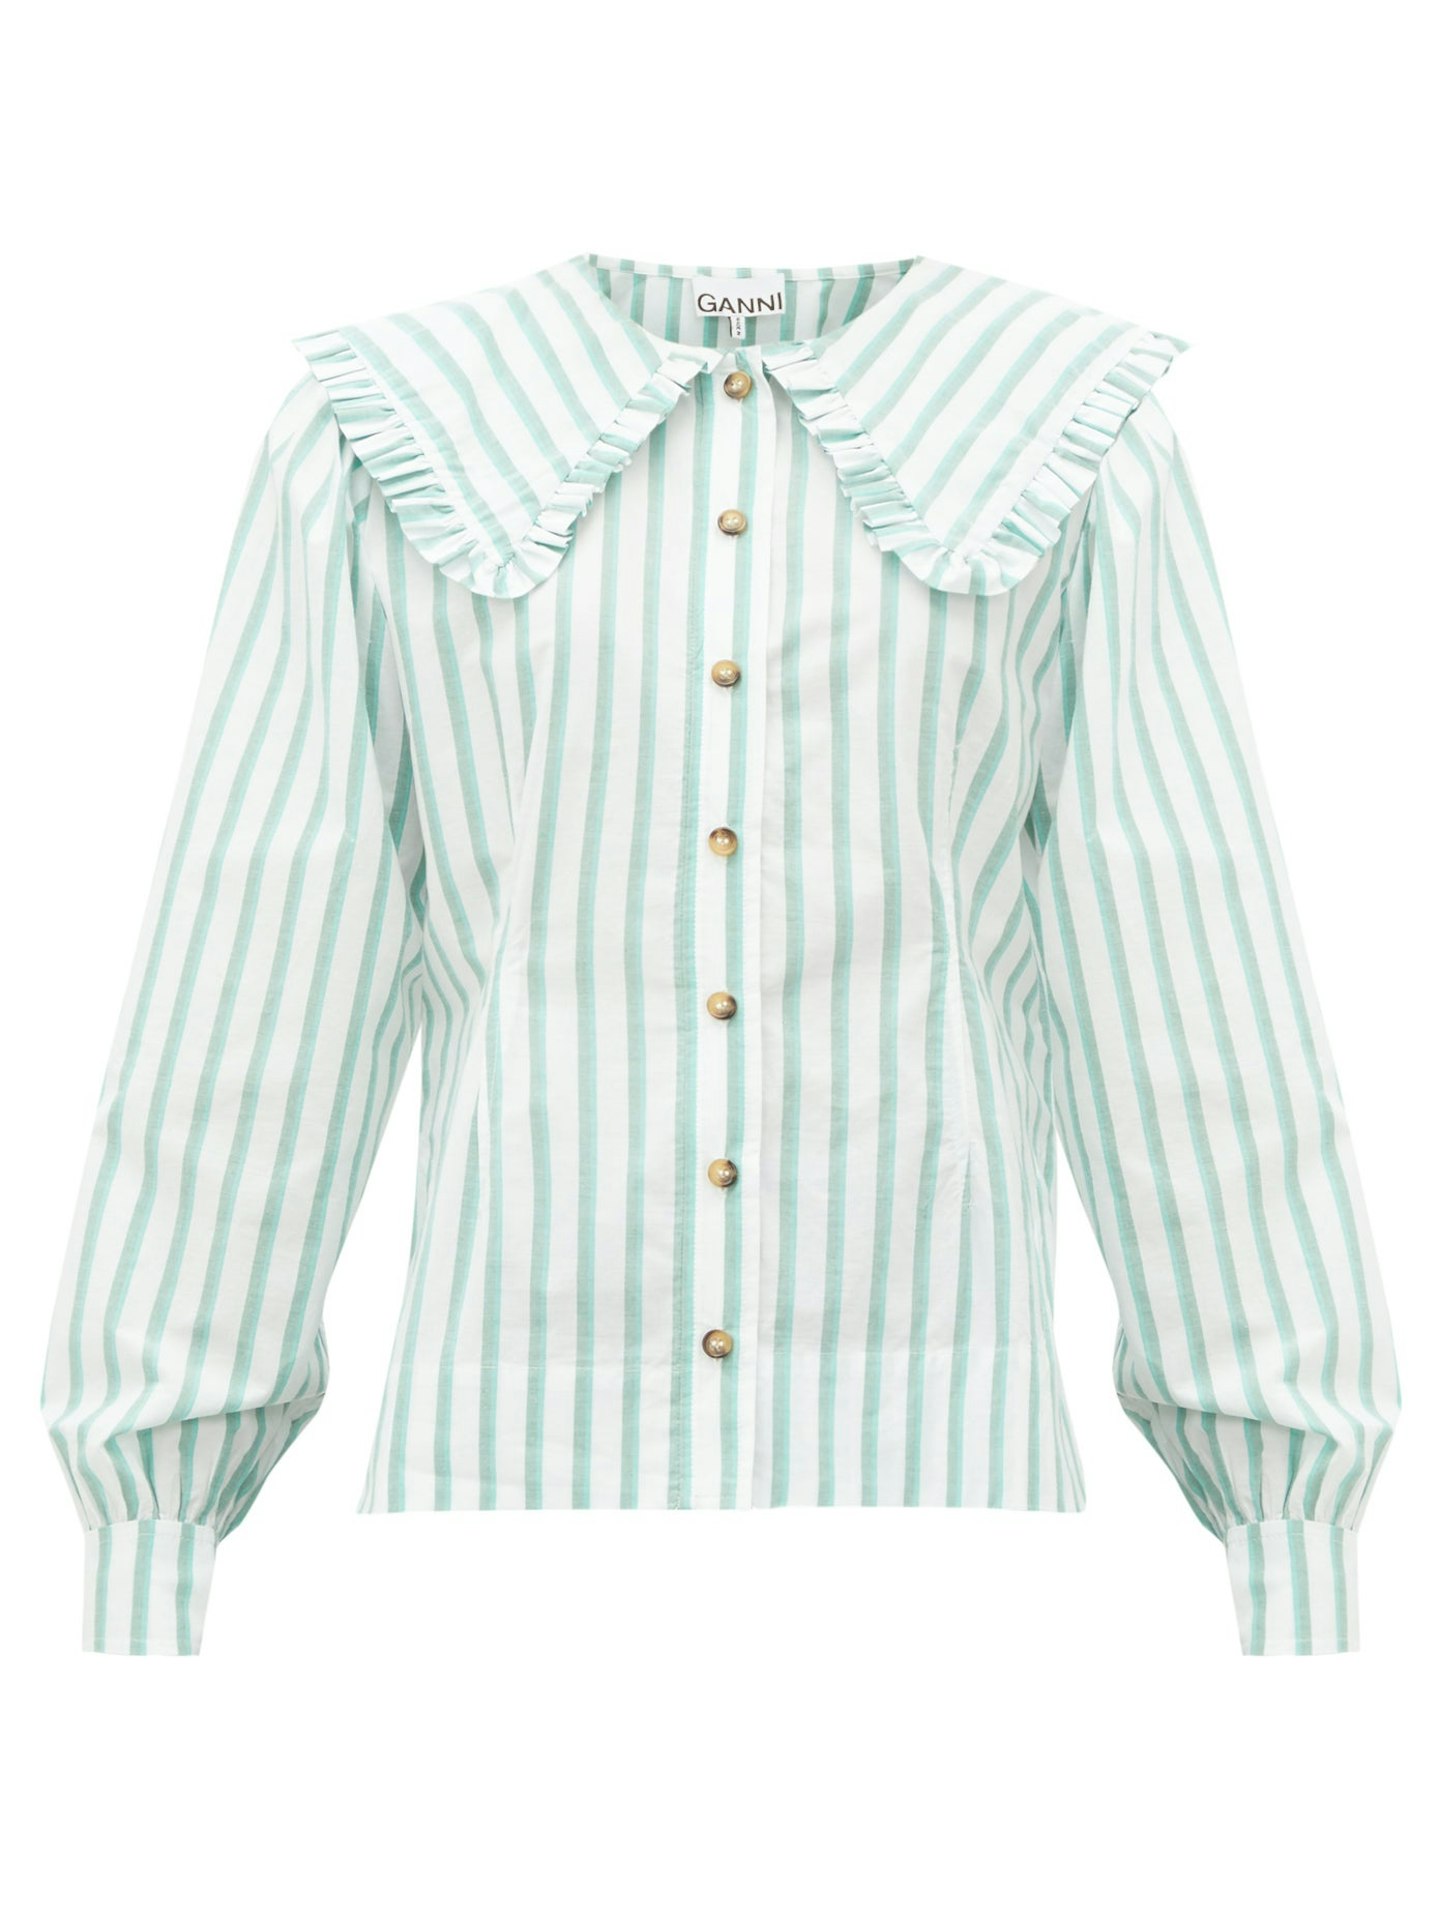 Ganni, Striped Shirt With Oversized Collar, £150